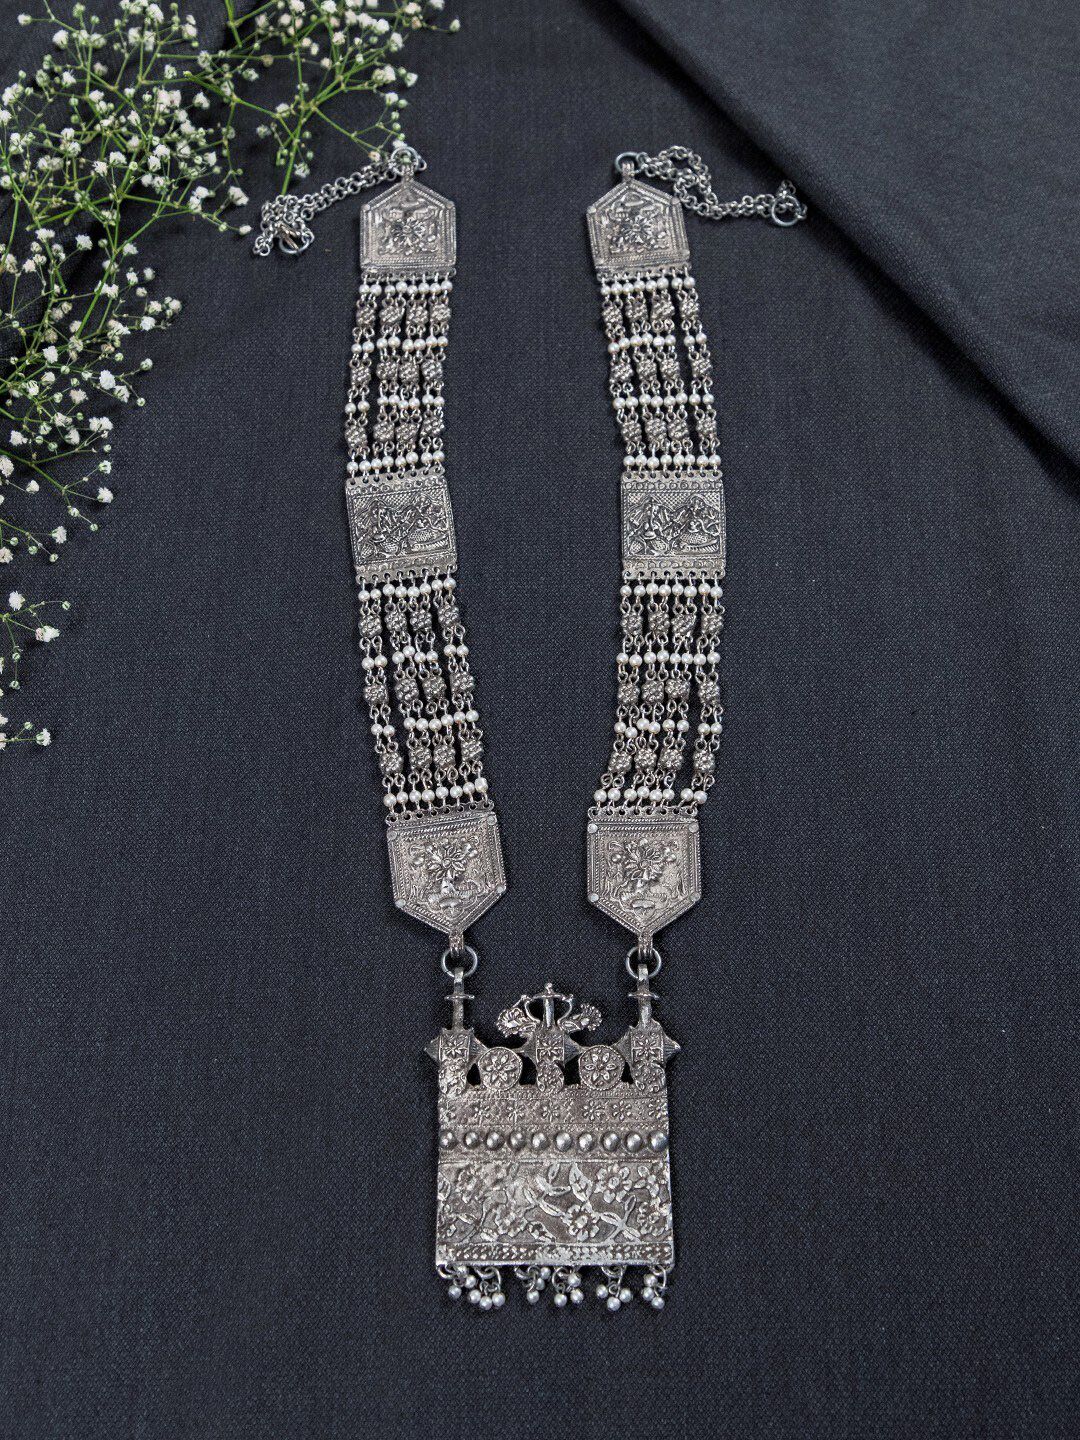 creyons by mansi Silver-Toned Oxidised Necklace Price in India